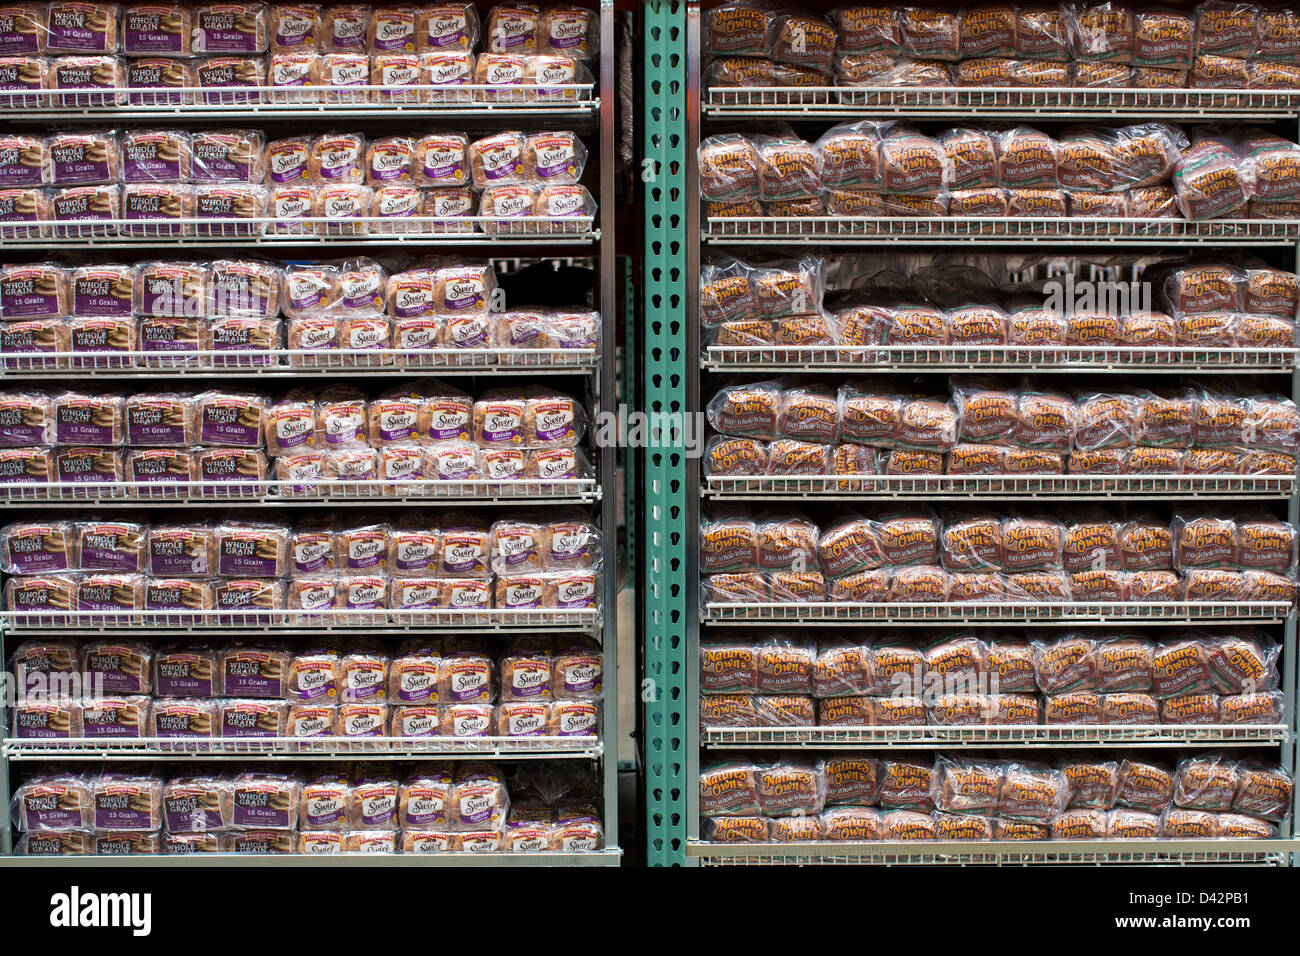 Pepperidge Farm whole grain and Nature's Own honey wheat bread on display at a Costco Wholesale Warehouse Club. Stock Photo